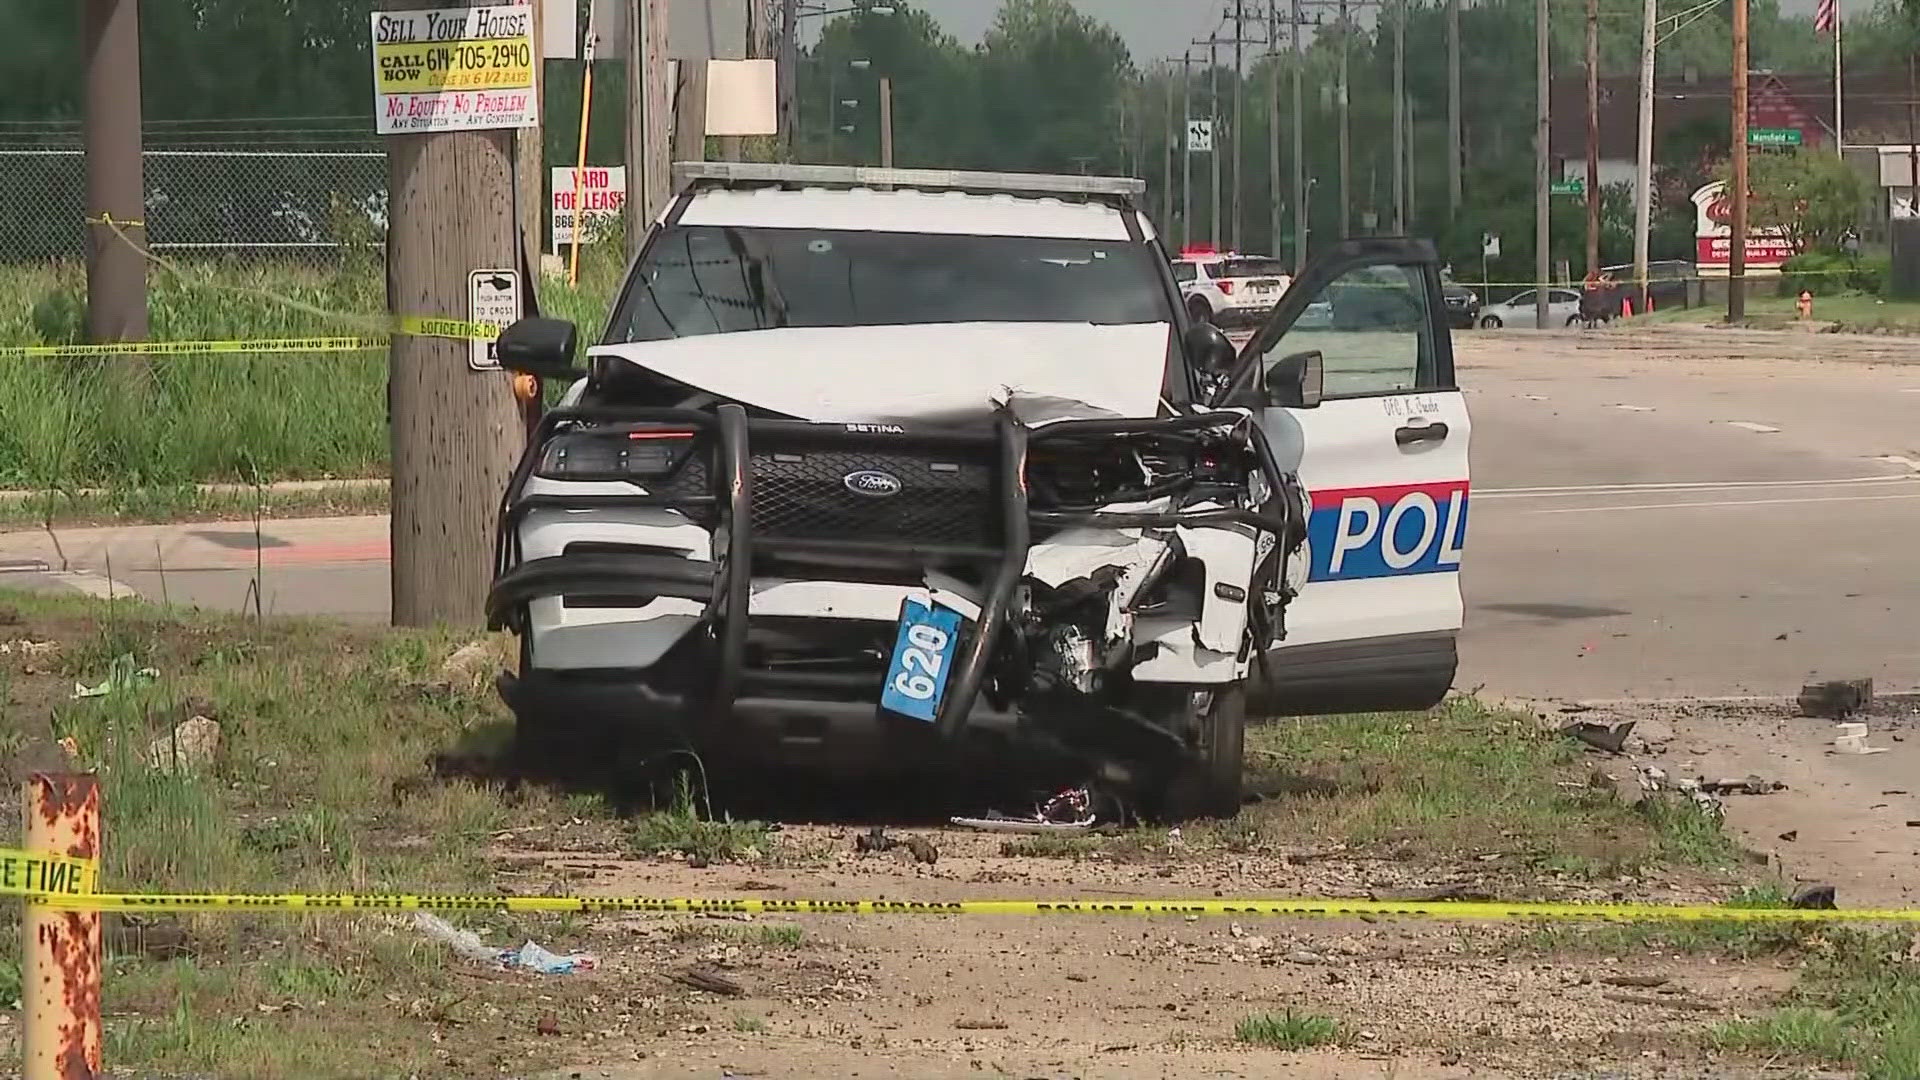 Police said the crash happened at East 5th and Joyce avenues just before 2:55 p.m.